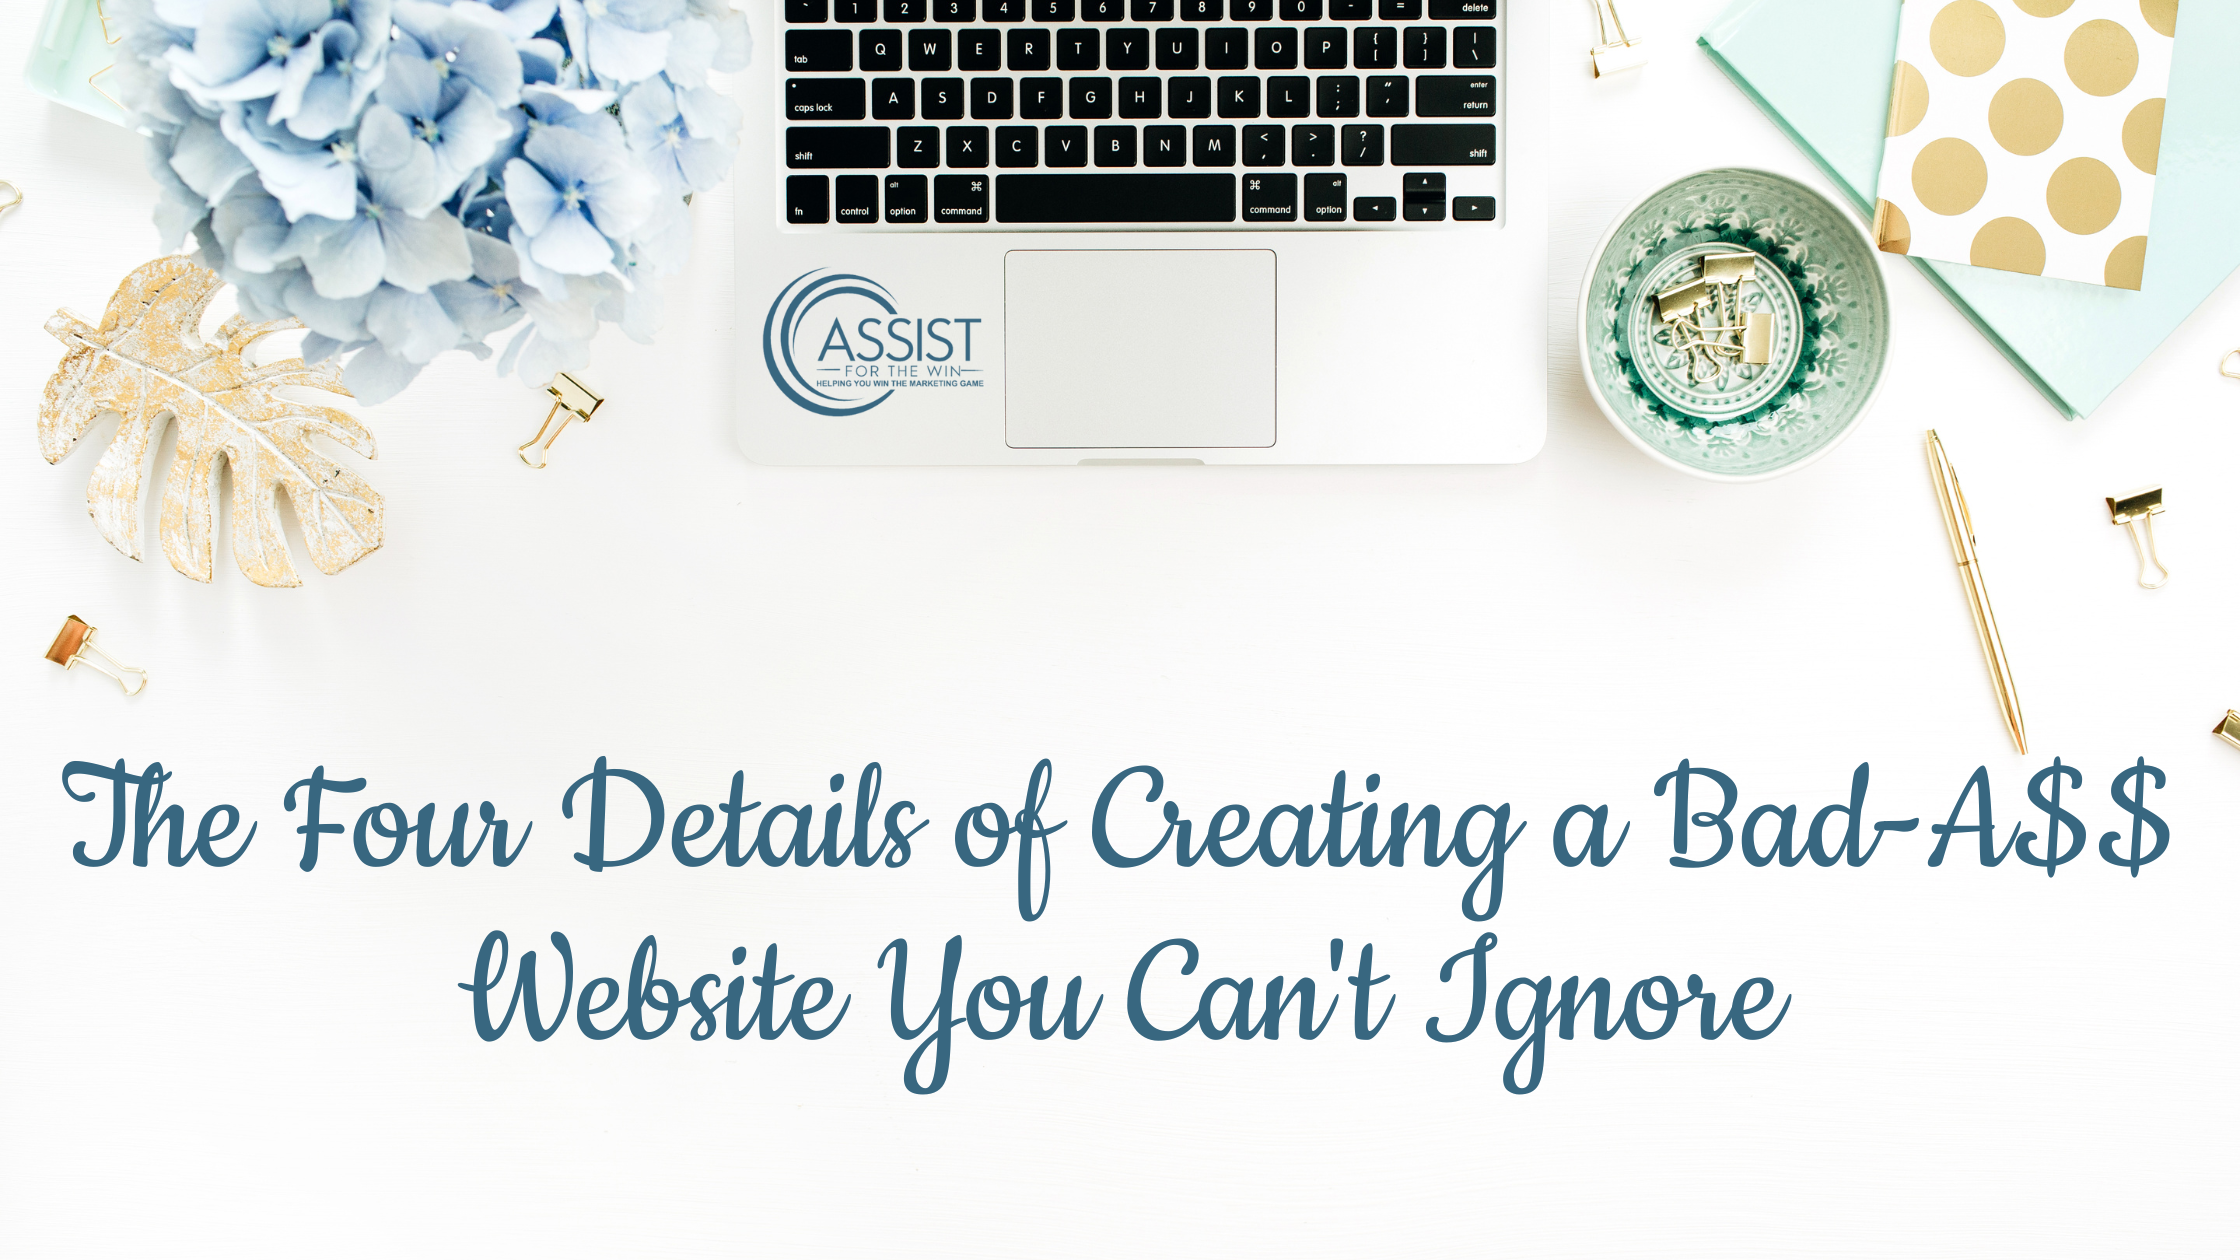 The Four Details of Creating a Bad-A$$ Website You Can't Ignore